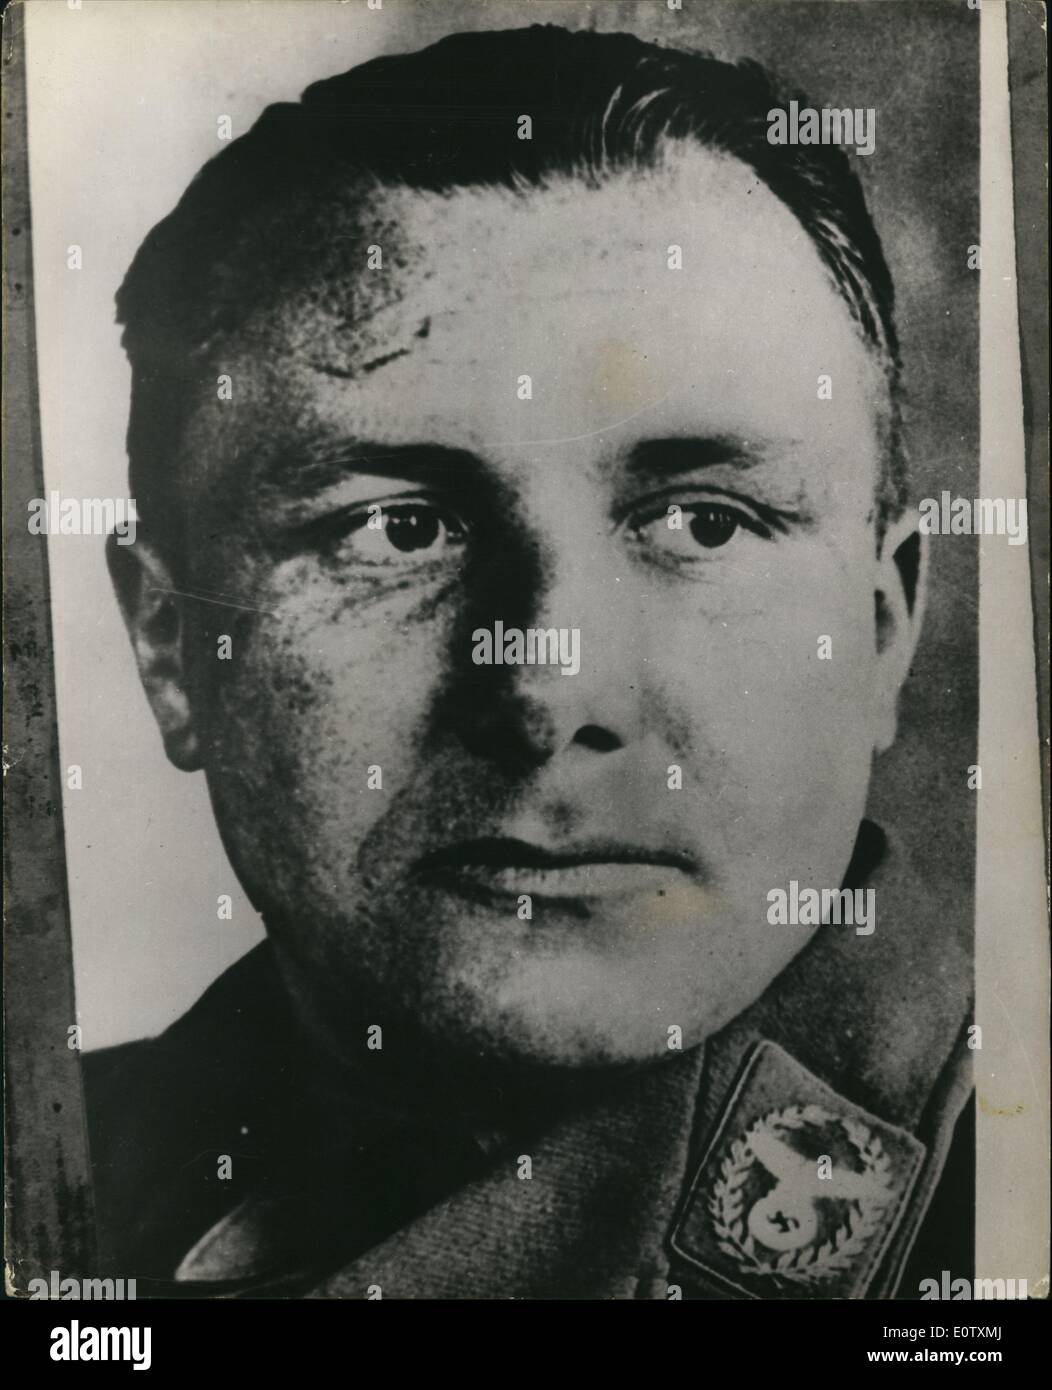 Sep. 09, 1960 - Martin Bormann Reported Held. Arrest In The Argentine: A man - arrested in the Argentine under the name of Walter Flegel - may be Martin Bormann - Hitler's deputy - according to a disclosure by the Minister of the Interior Dr. Alfredo Vito~~~~. The man is said to have most of the physical characteristics of the missing Nazi, although he only appeared to be about 48 years of age - and Bormann - if alive - would be ~0. The arrested man has only one arm - but Bormann could have lose an arm in escapi from Berlin - or later. (NB Stock Photo